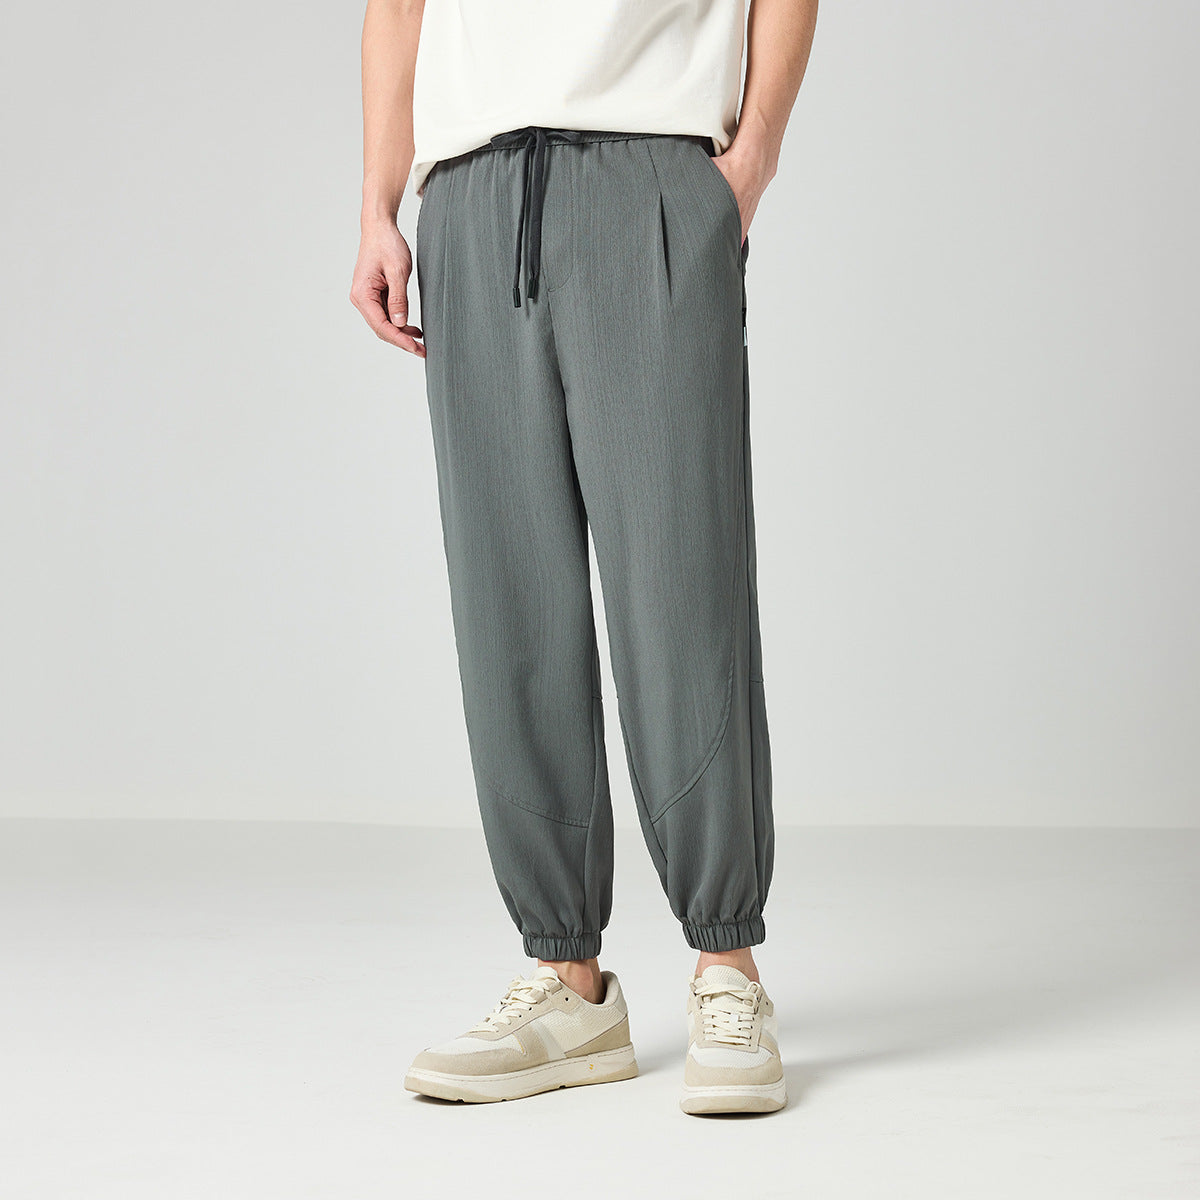 Thin Cool Casual Pants Simple Ankle-length